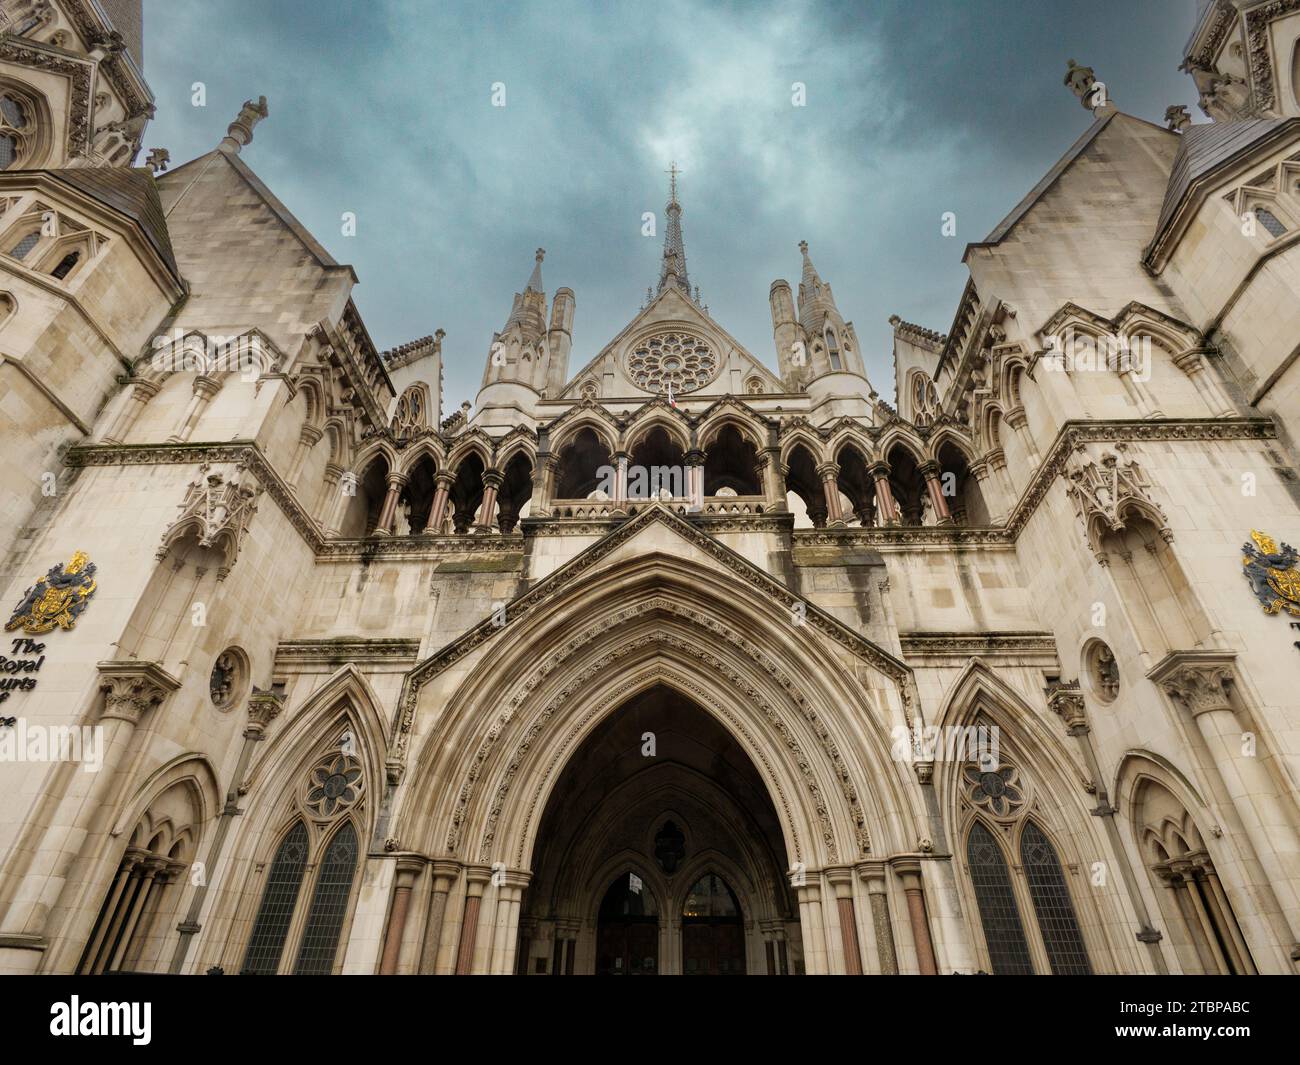 Die Royal Courts of Justice oder Law Courts, die den High Court in Westminster, London, UK, beherbergt Stockfoto